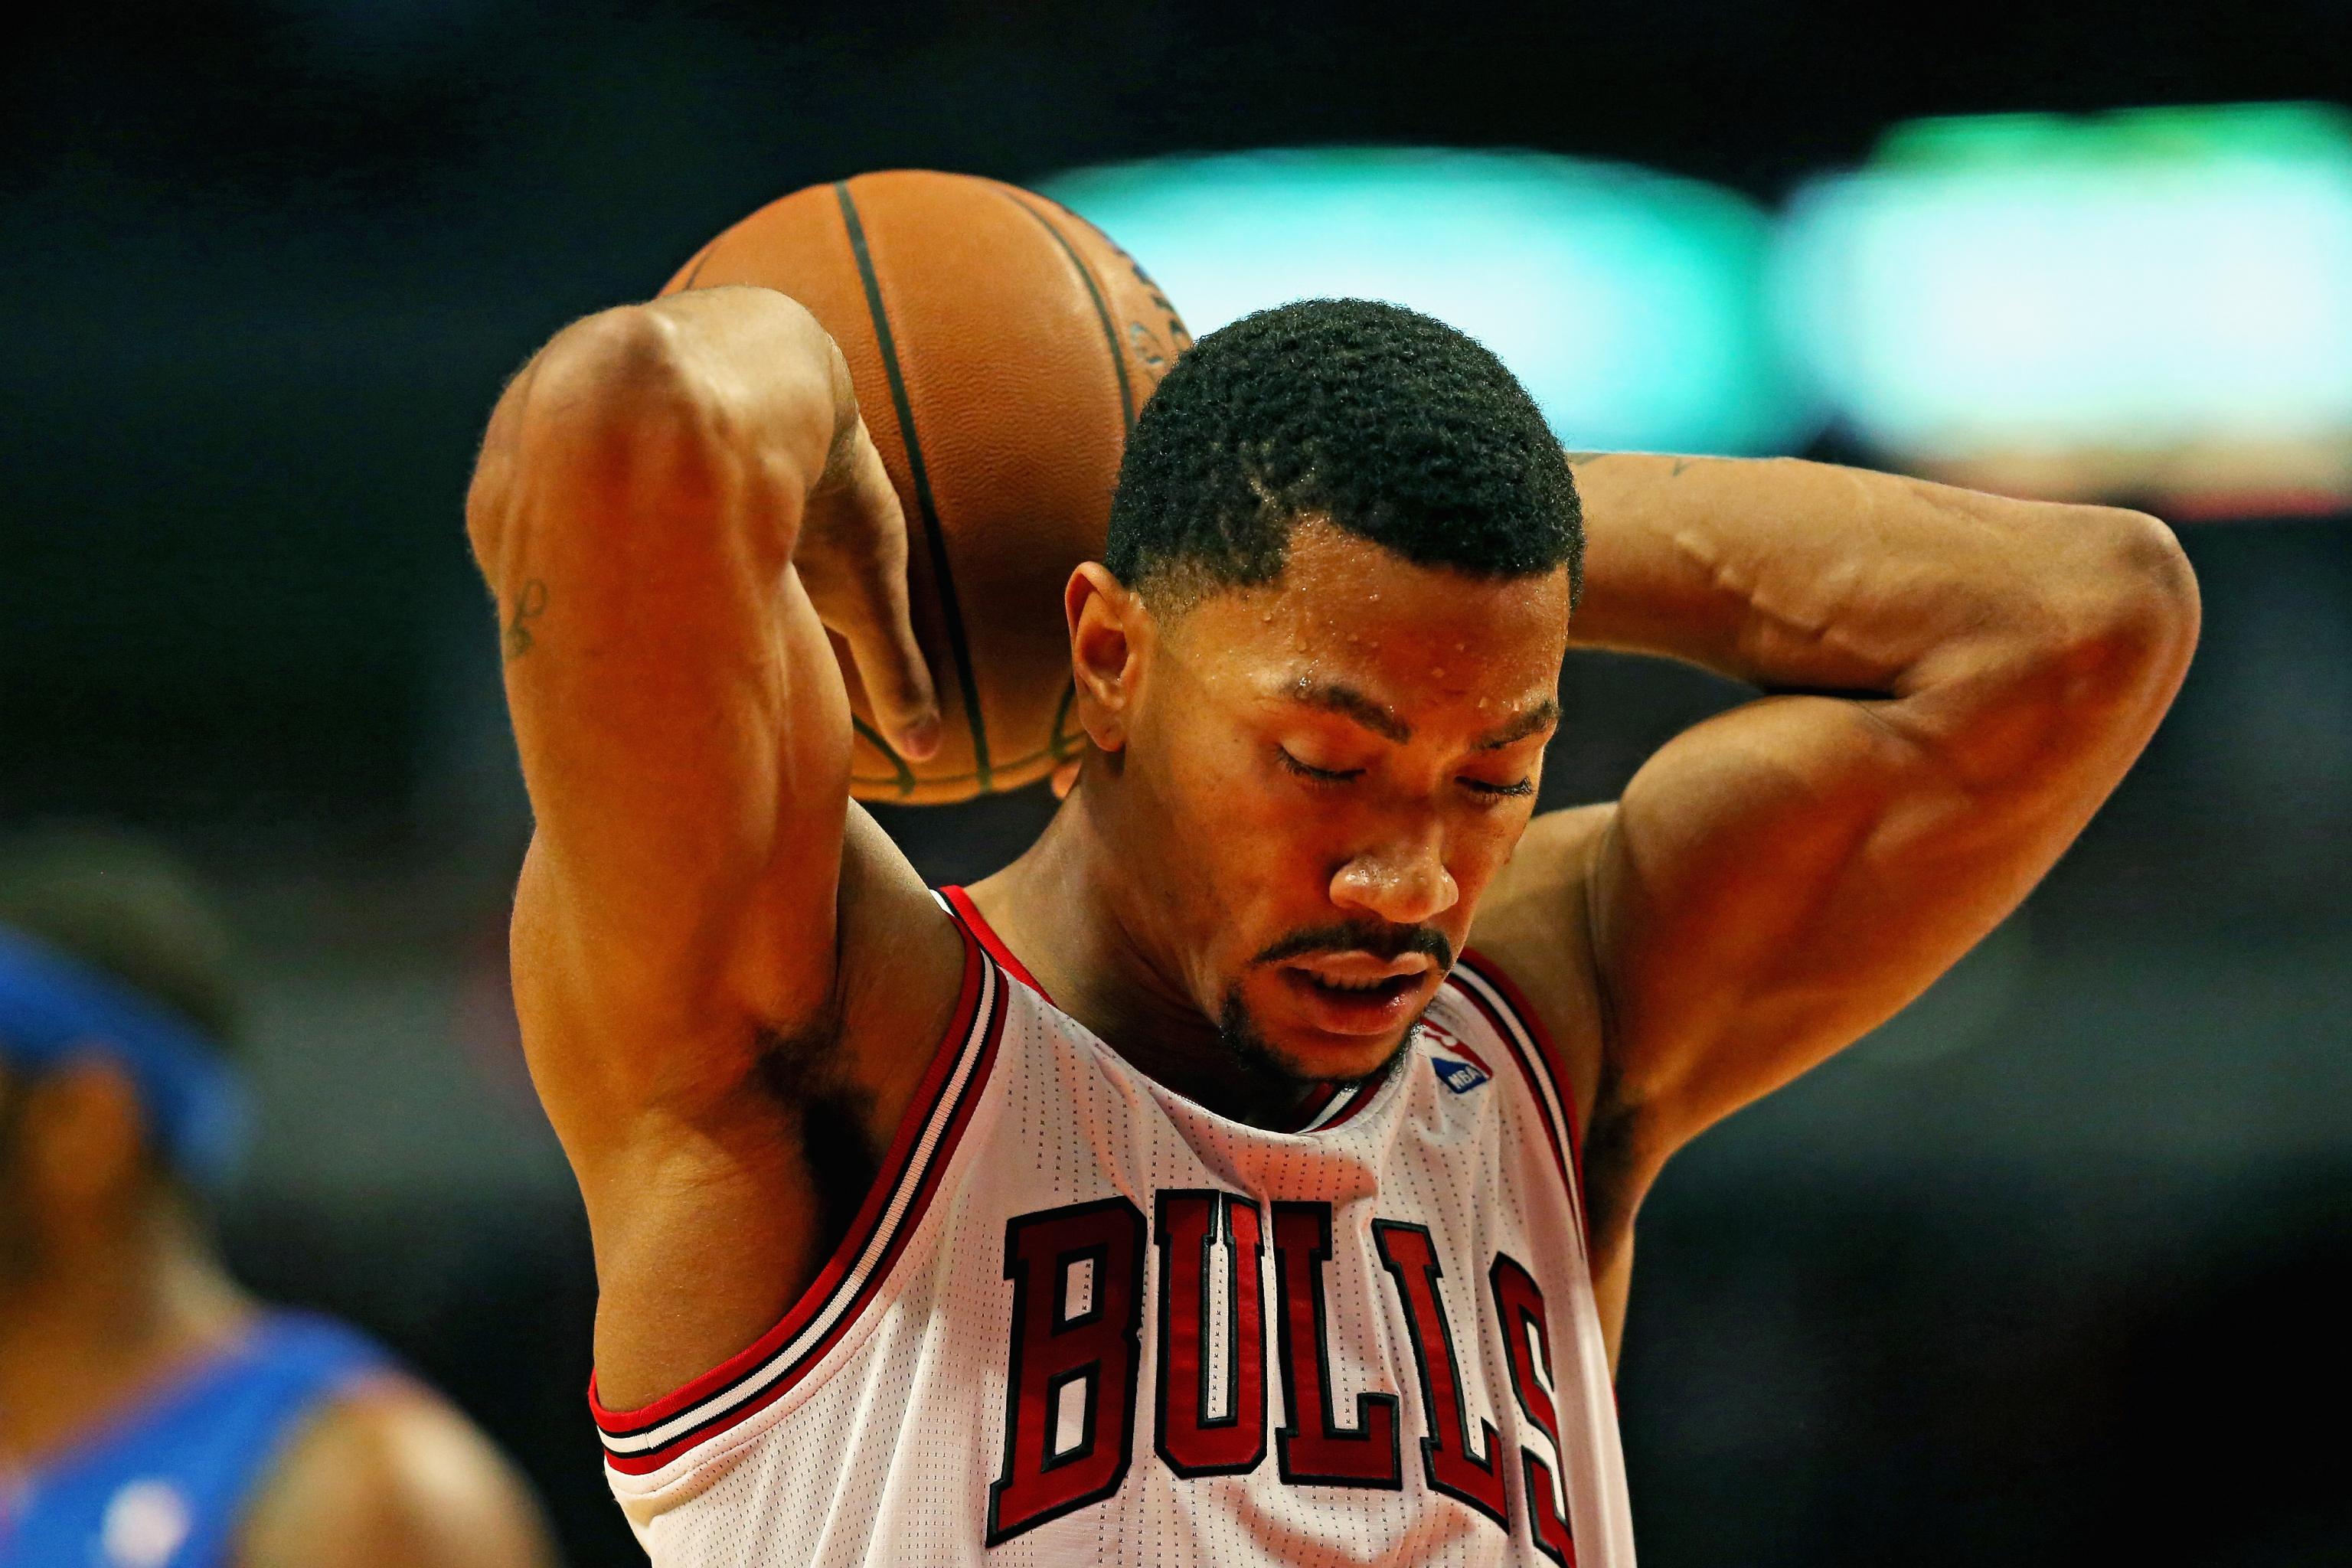 NBA eager to get Derrick Rose back on the floor